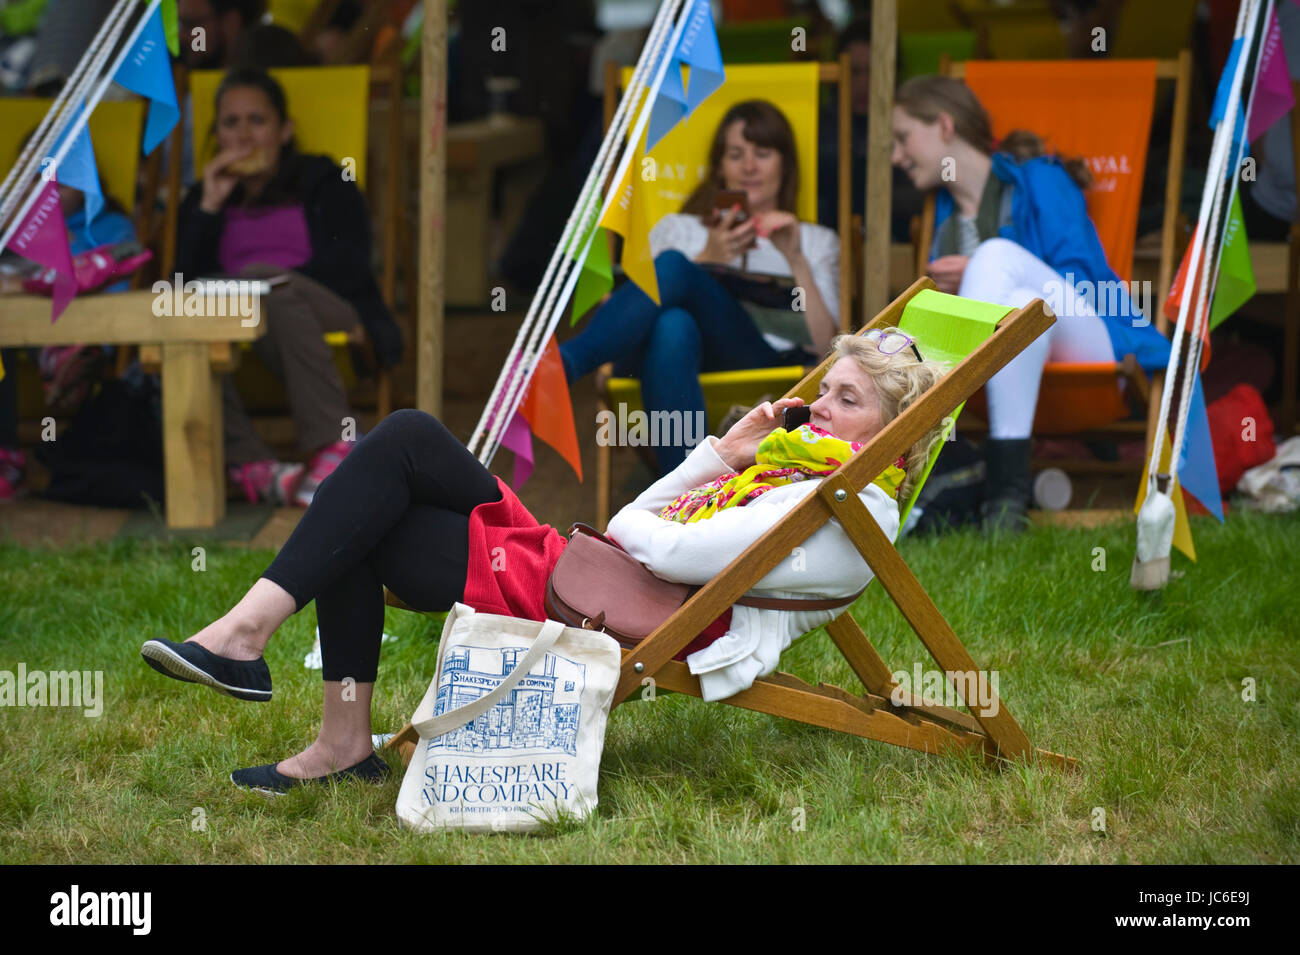 Woman on smartphone & other visitors relaxing in deckchairs at Hay Festival of Literature and the Arts 2017 Hay-on-Wye Powys Wales UK Stock Photo